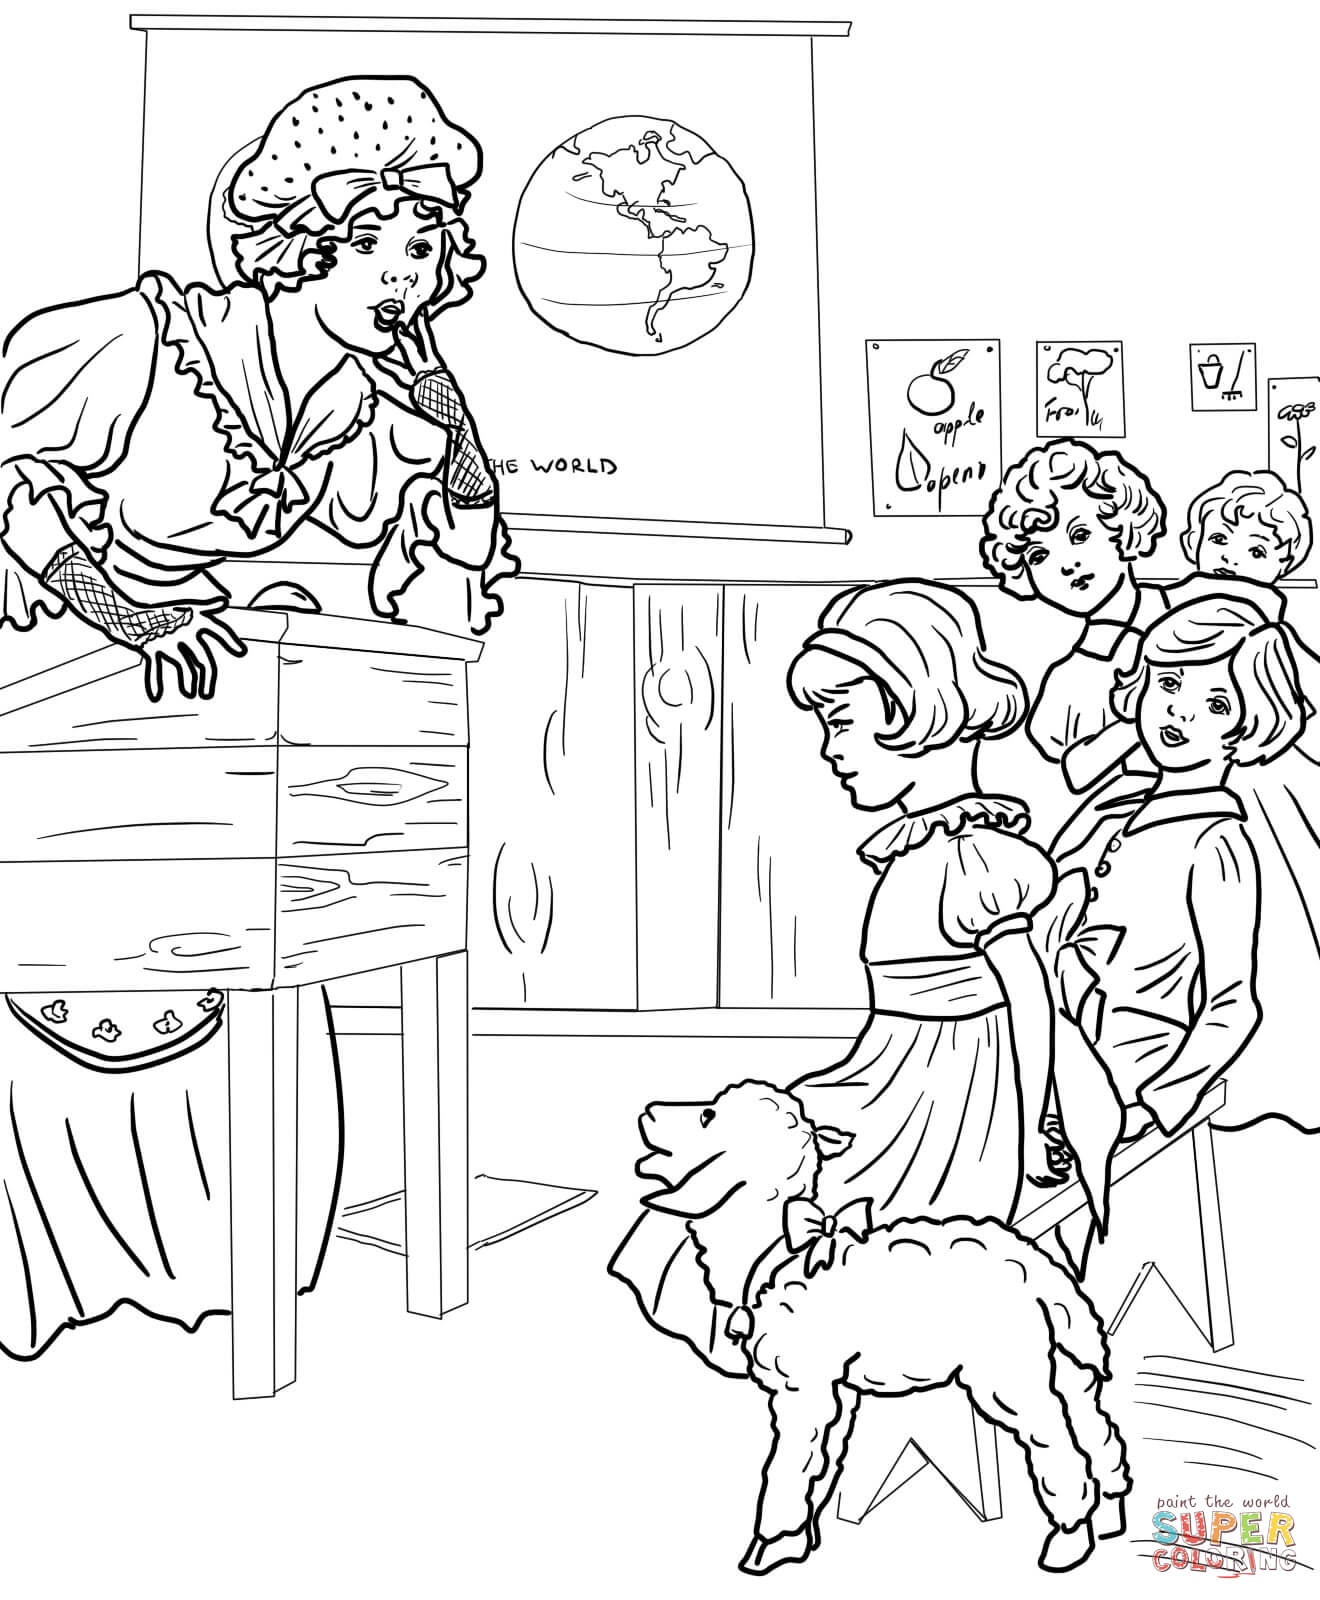 Mother Goose Nursery Rhymes Coloring Pages | Free Coloring Pages - Mother Goose Coloring Pages Free Printable